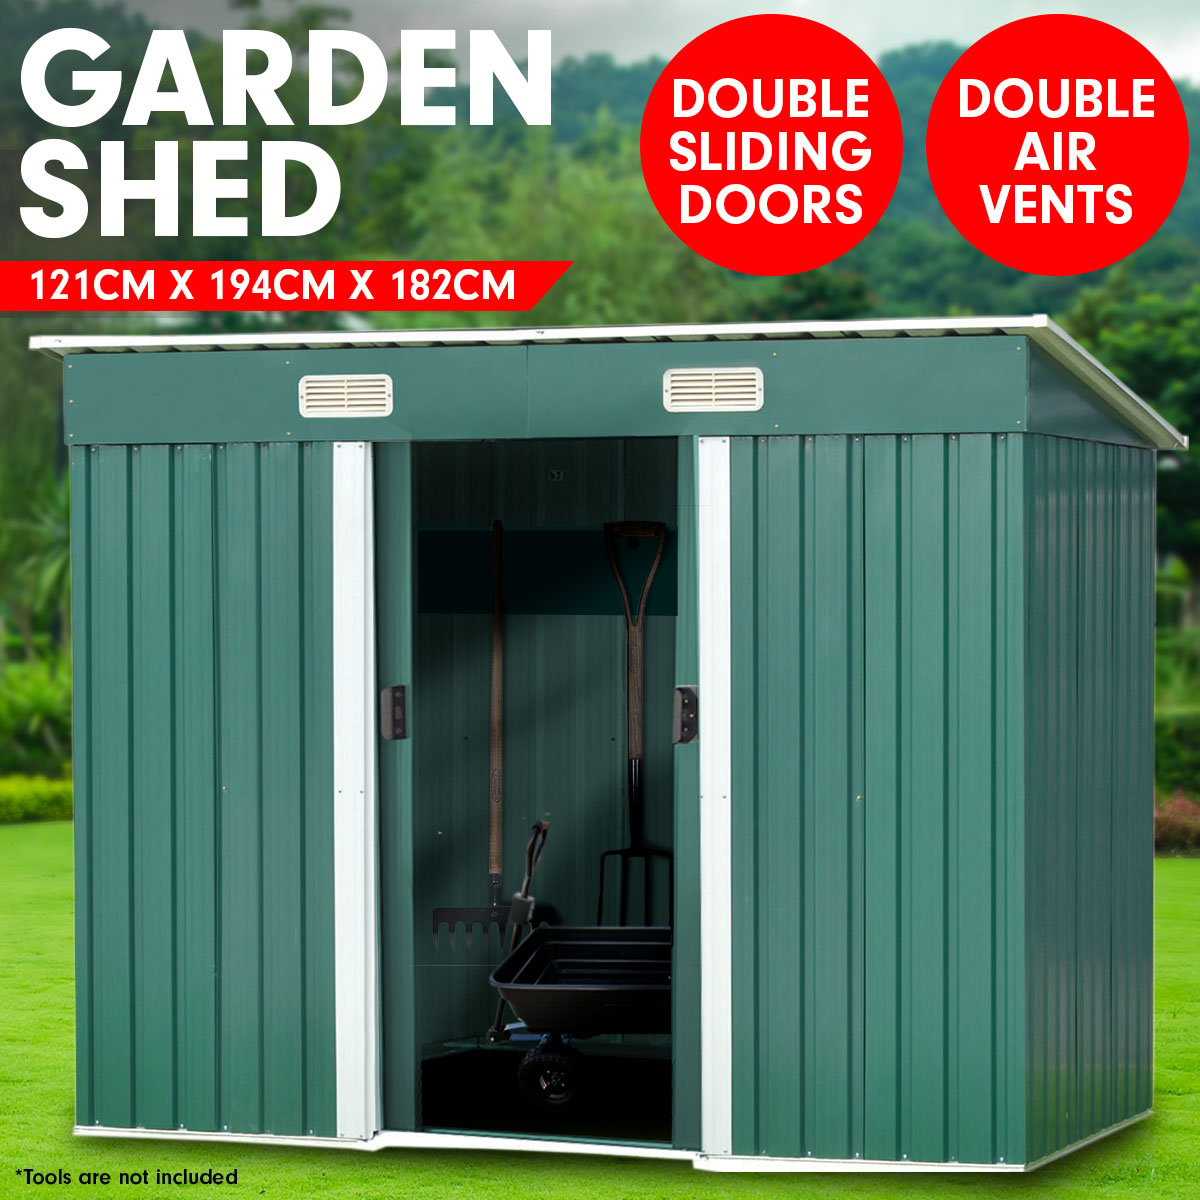 Garden Shed Flat 4ft x 6ft Outdoor Storage Shelter - Green 2